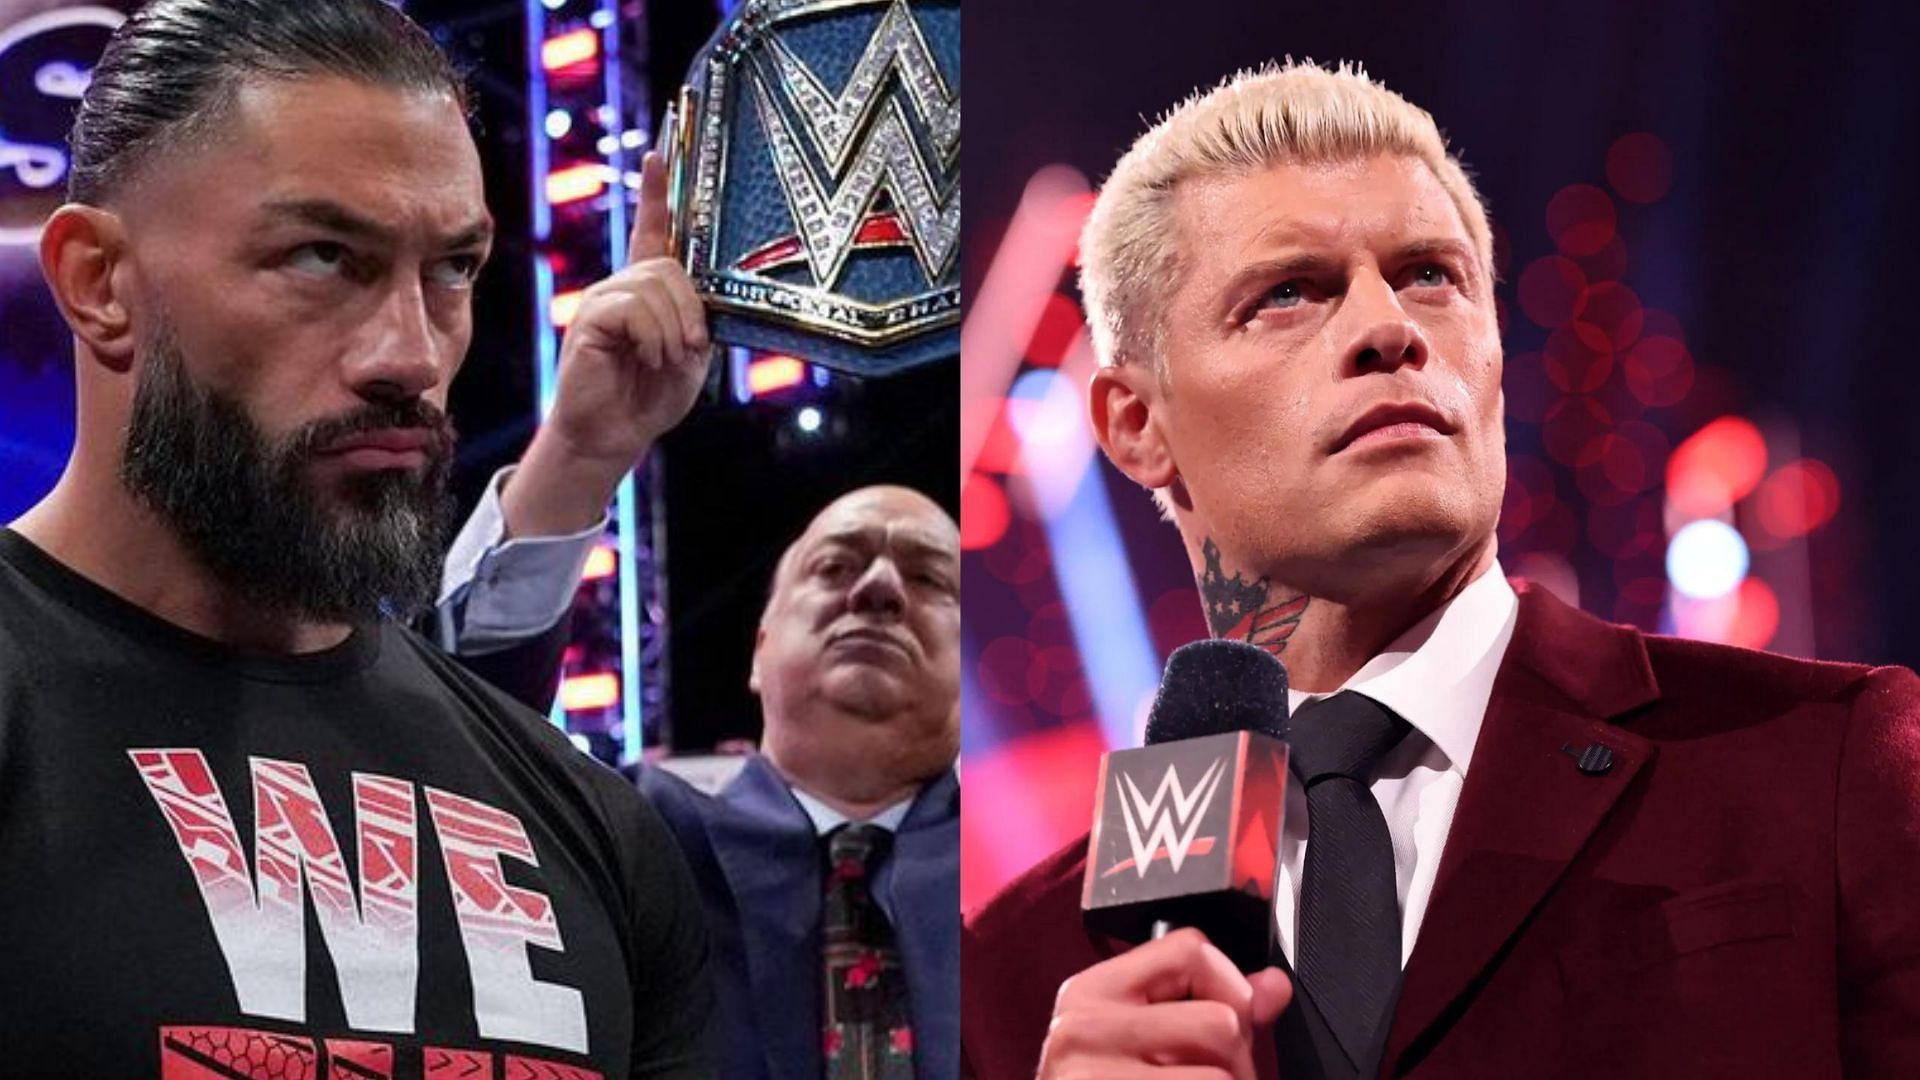 Roman Reigns might have something to say for Cody Rhodes on WWE RAW